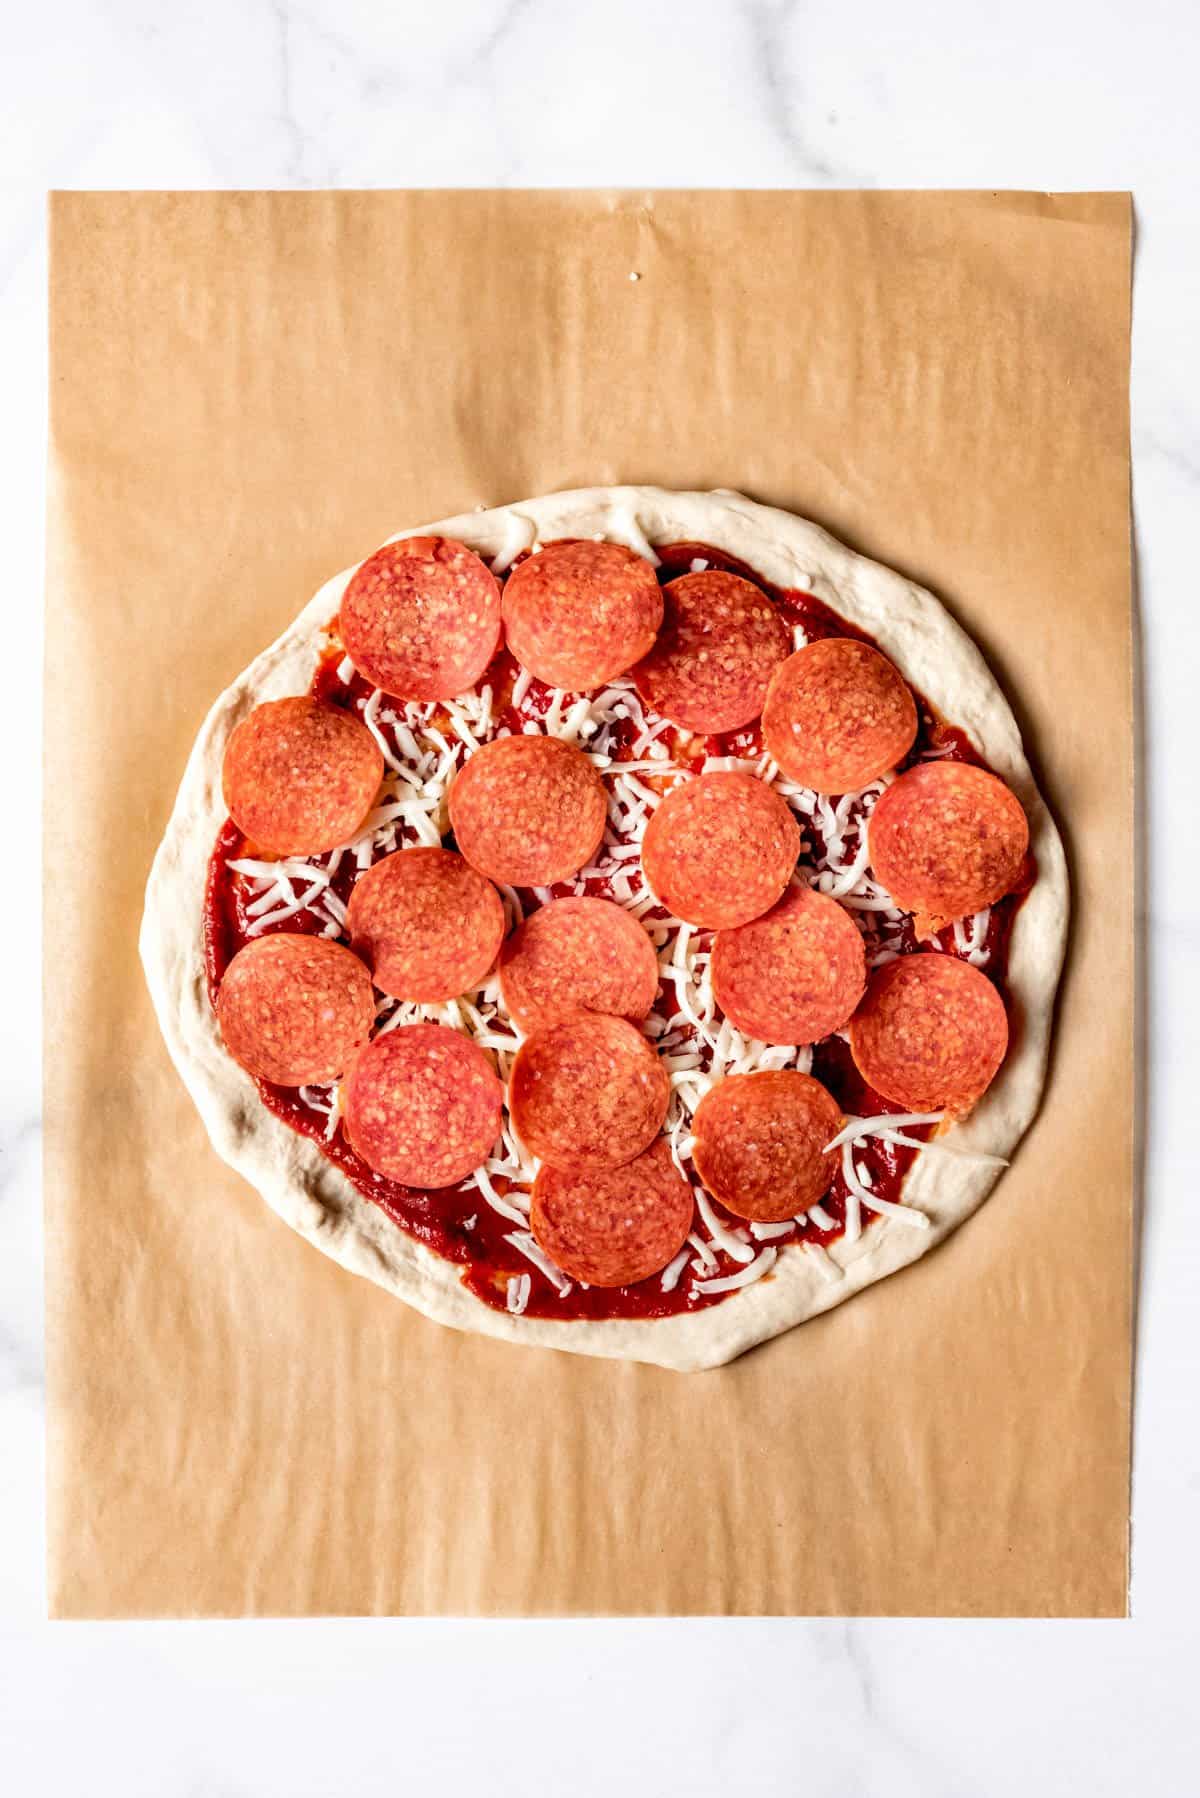 Pepperoni arranged on top of a homemade pizza.